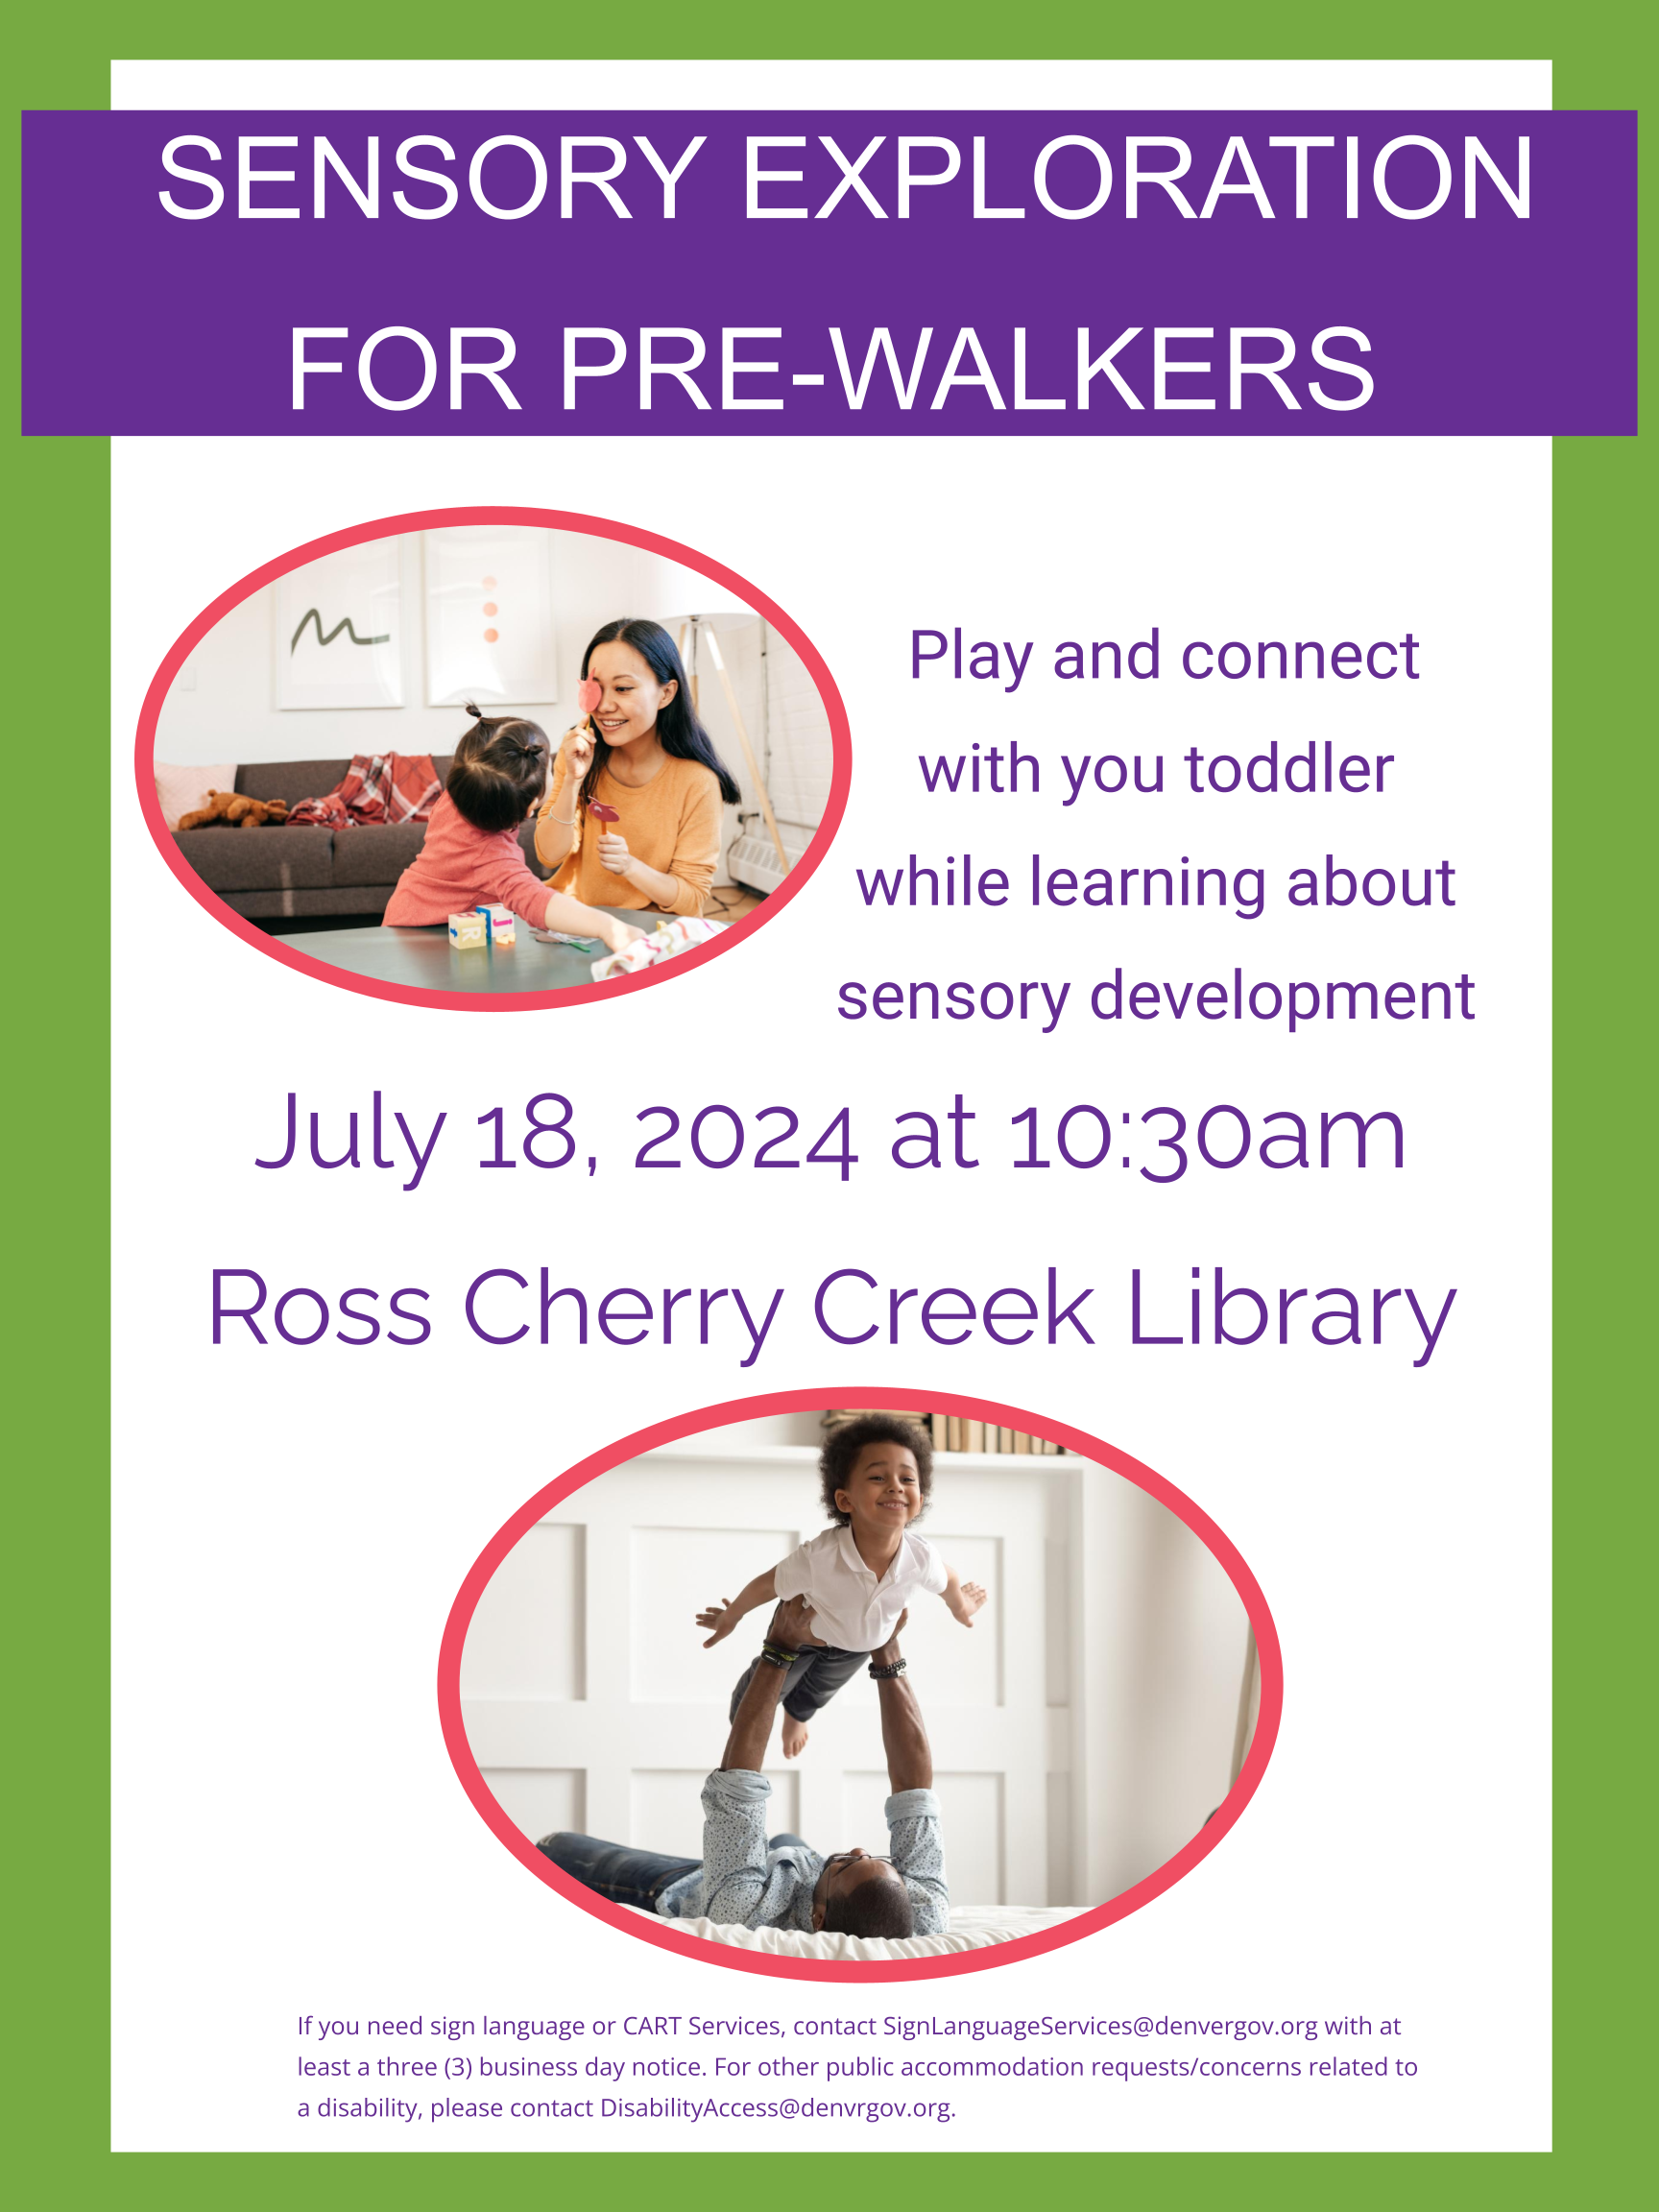 Poster depicting caregivers and babies with the information that Sensory Exploration for walkers involves  Play and connect with you baby while learning about sensory development and will take place on July 18 at 10:30am at the Ross Cherry Creek Library